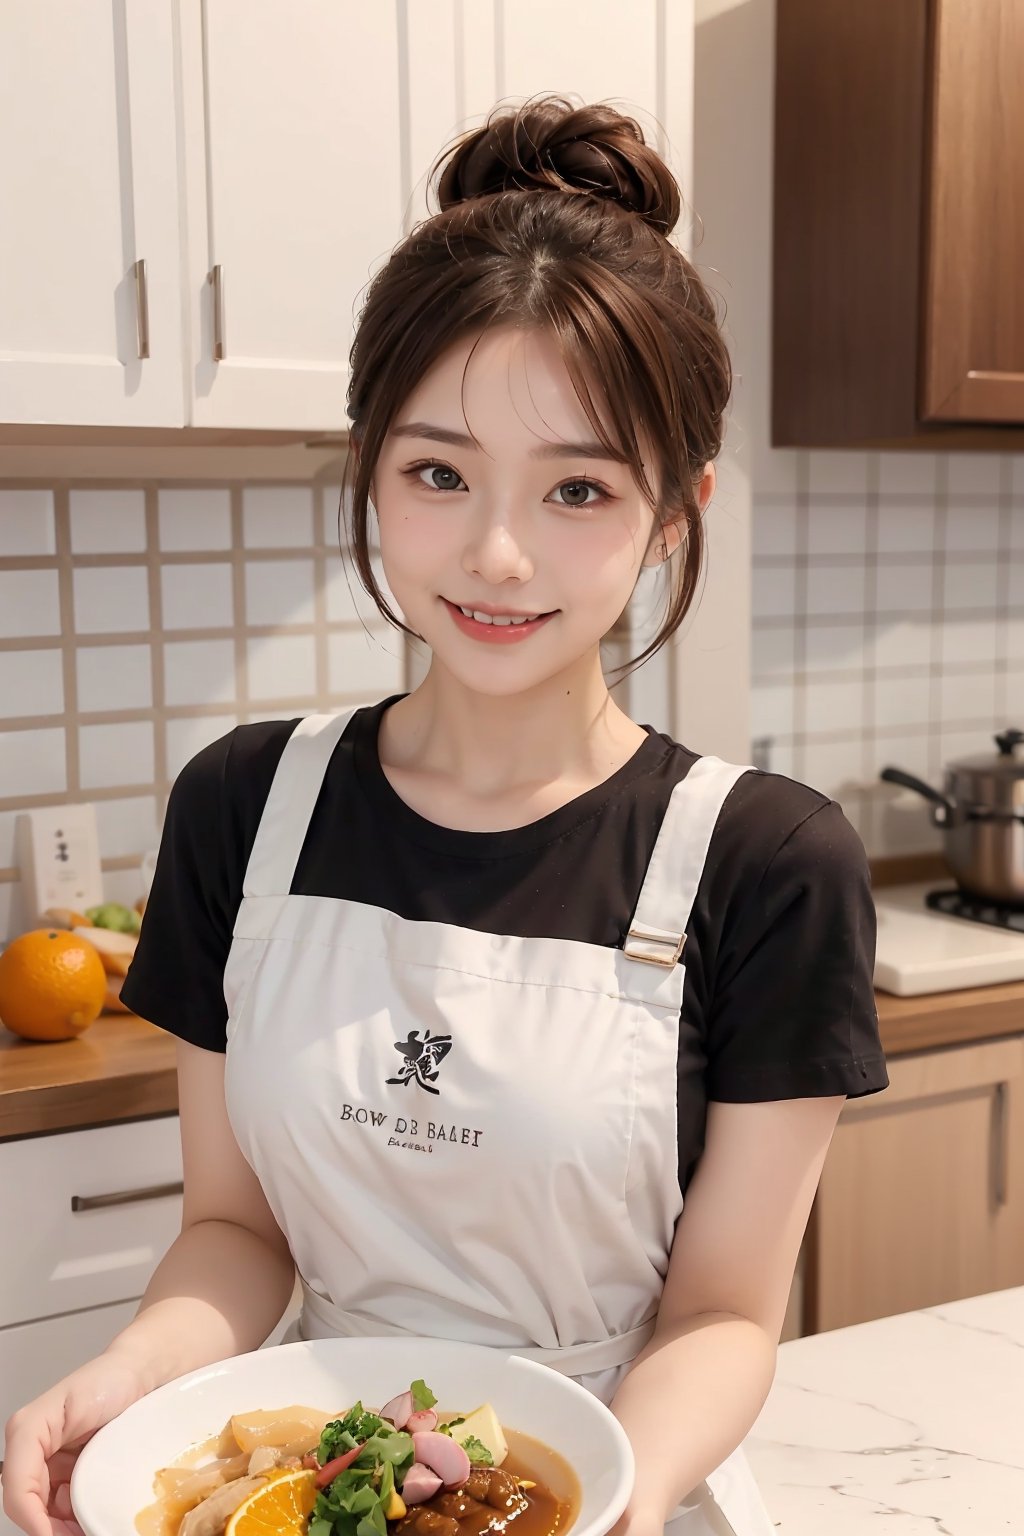 beautiful, 1girl,
(Brown hair:1.2), hair tied up into a bun
smile, orange T-shirt under white apron, hk_girl, holding a big delicious meal dish with both hands, kitchen background, wife, waifu,blurred background